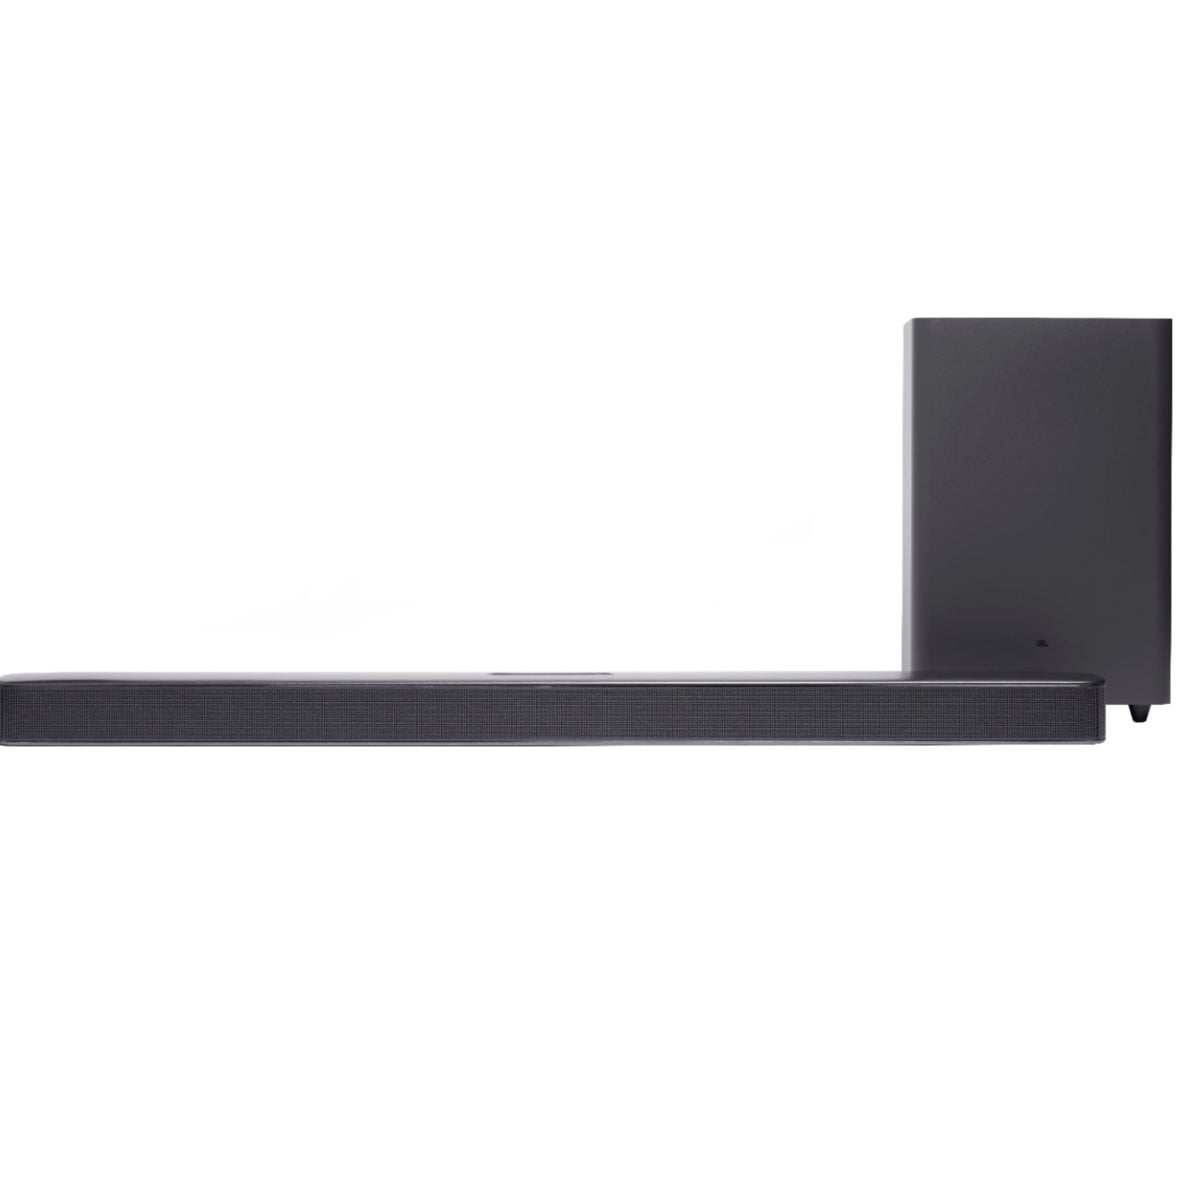 6395178Cv11D Scaled Jbl &Lt;H1&Gt;Jbl - 5.1-Channel Soundbar With Wireless Subwoofer - Black&Lt;/H1&Gt; Https://Www.youtube.com/Watch?V=386_Dt_1Ajy Get Better Audio Quality From Your Tv With This Jbl Bar 5.1 Surround Soundbar. Multibeam Technology Delivers Powerful Sound Without The Need For Extra Speakers, While Wi-Fi Connectivity Provides Access To Chromecast And Airplay 2 For Streaming Content. This Bluetooth-Enabled Jbl Bar 5.1 Surround Soundbar Features A Wireless Subwoofer That Adds Punchy Bass To Movie Soundtracks And Action-Packed Scenes. Jbl Jbl - 5.1-Channel Soundbar With Wireless Subwoofer - Black